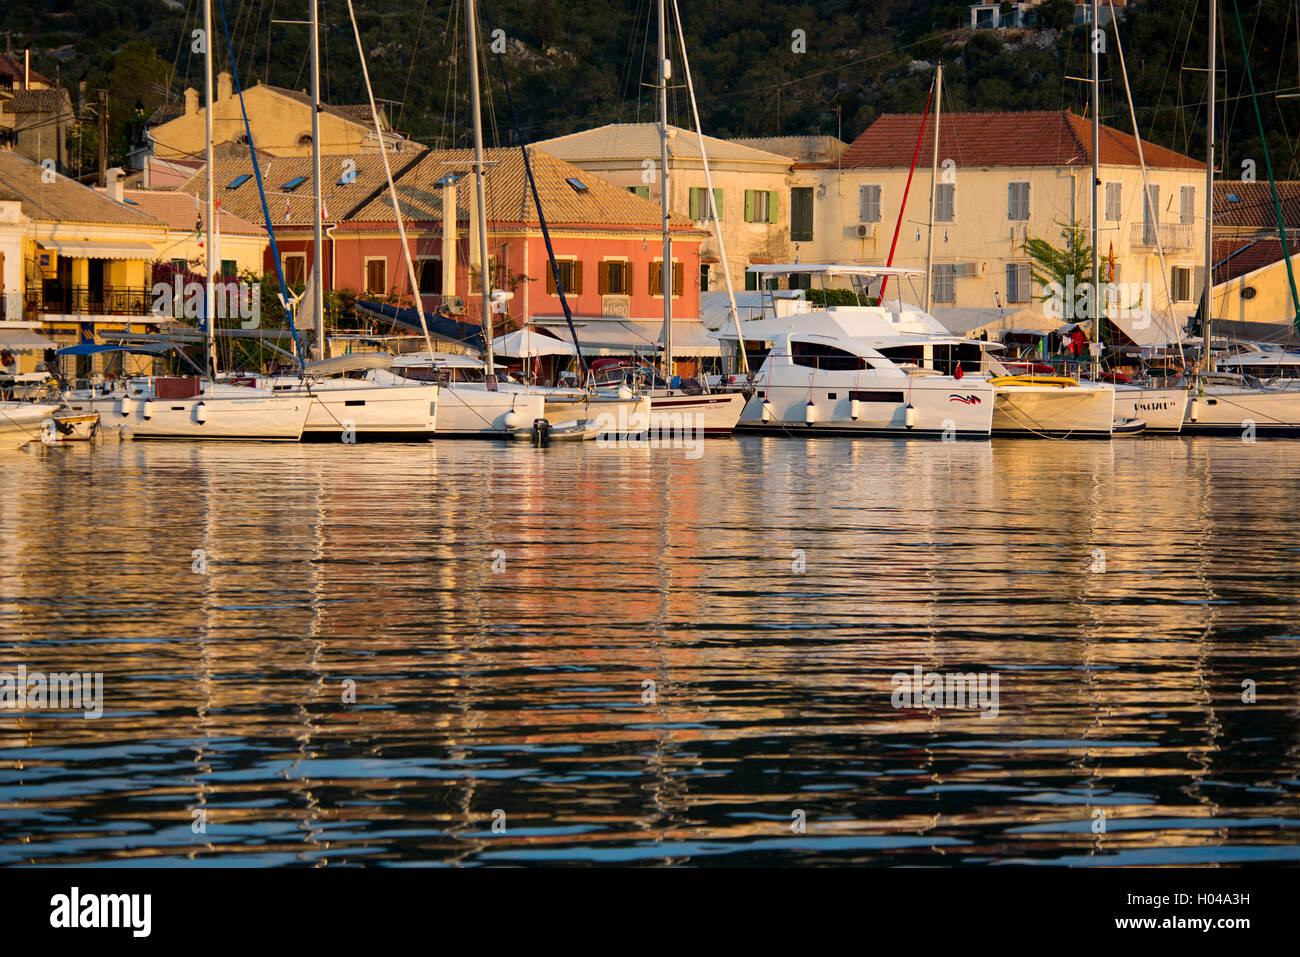 The picturesque harbour of Gaios at sunrise on Paxos, The Ionian Islands, The Greek Islands, Greece, Europe Stock Photo